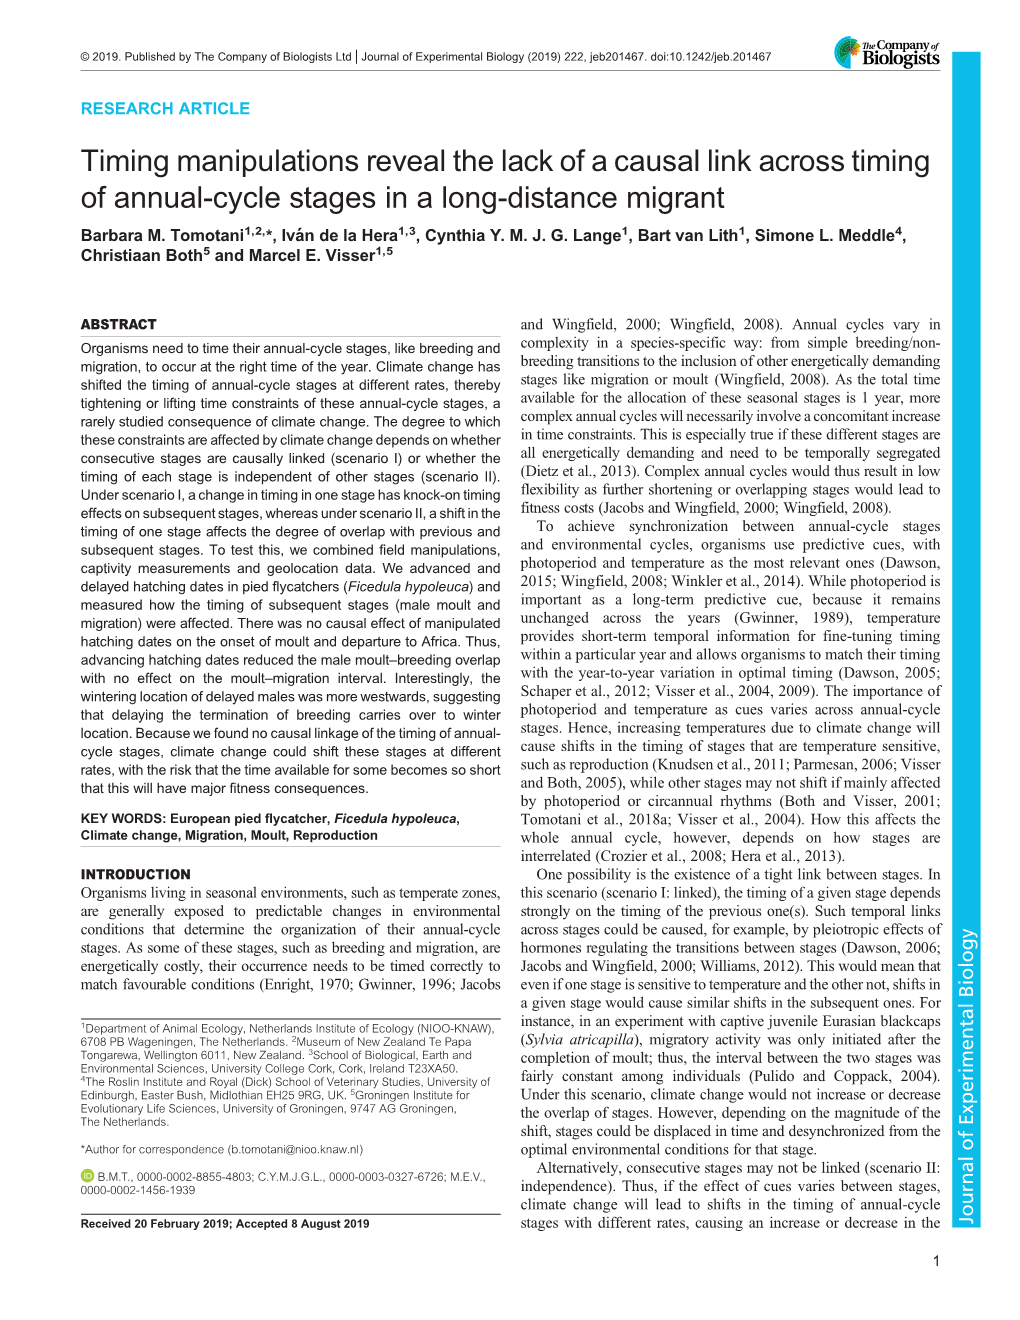 Timing Manipulations Reveal the Lack of a Causal Link Across Timing of Annual-Cycle Stages in a Long-Distance Migrant Barbara M